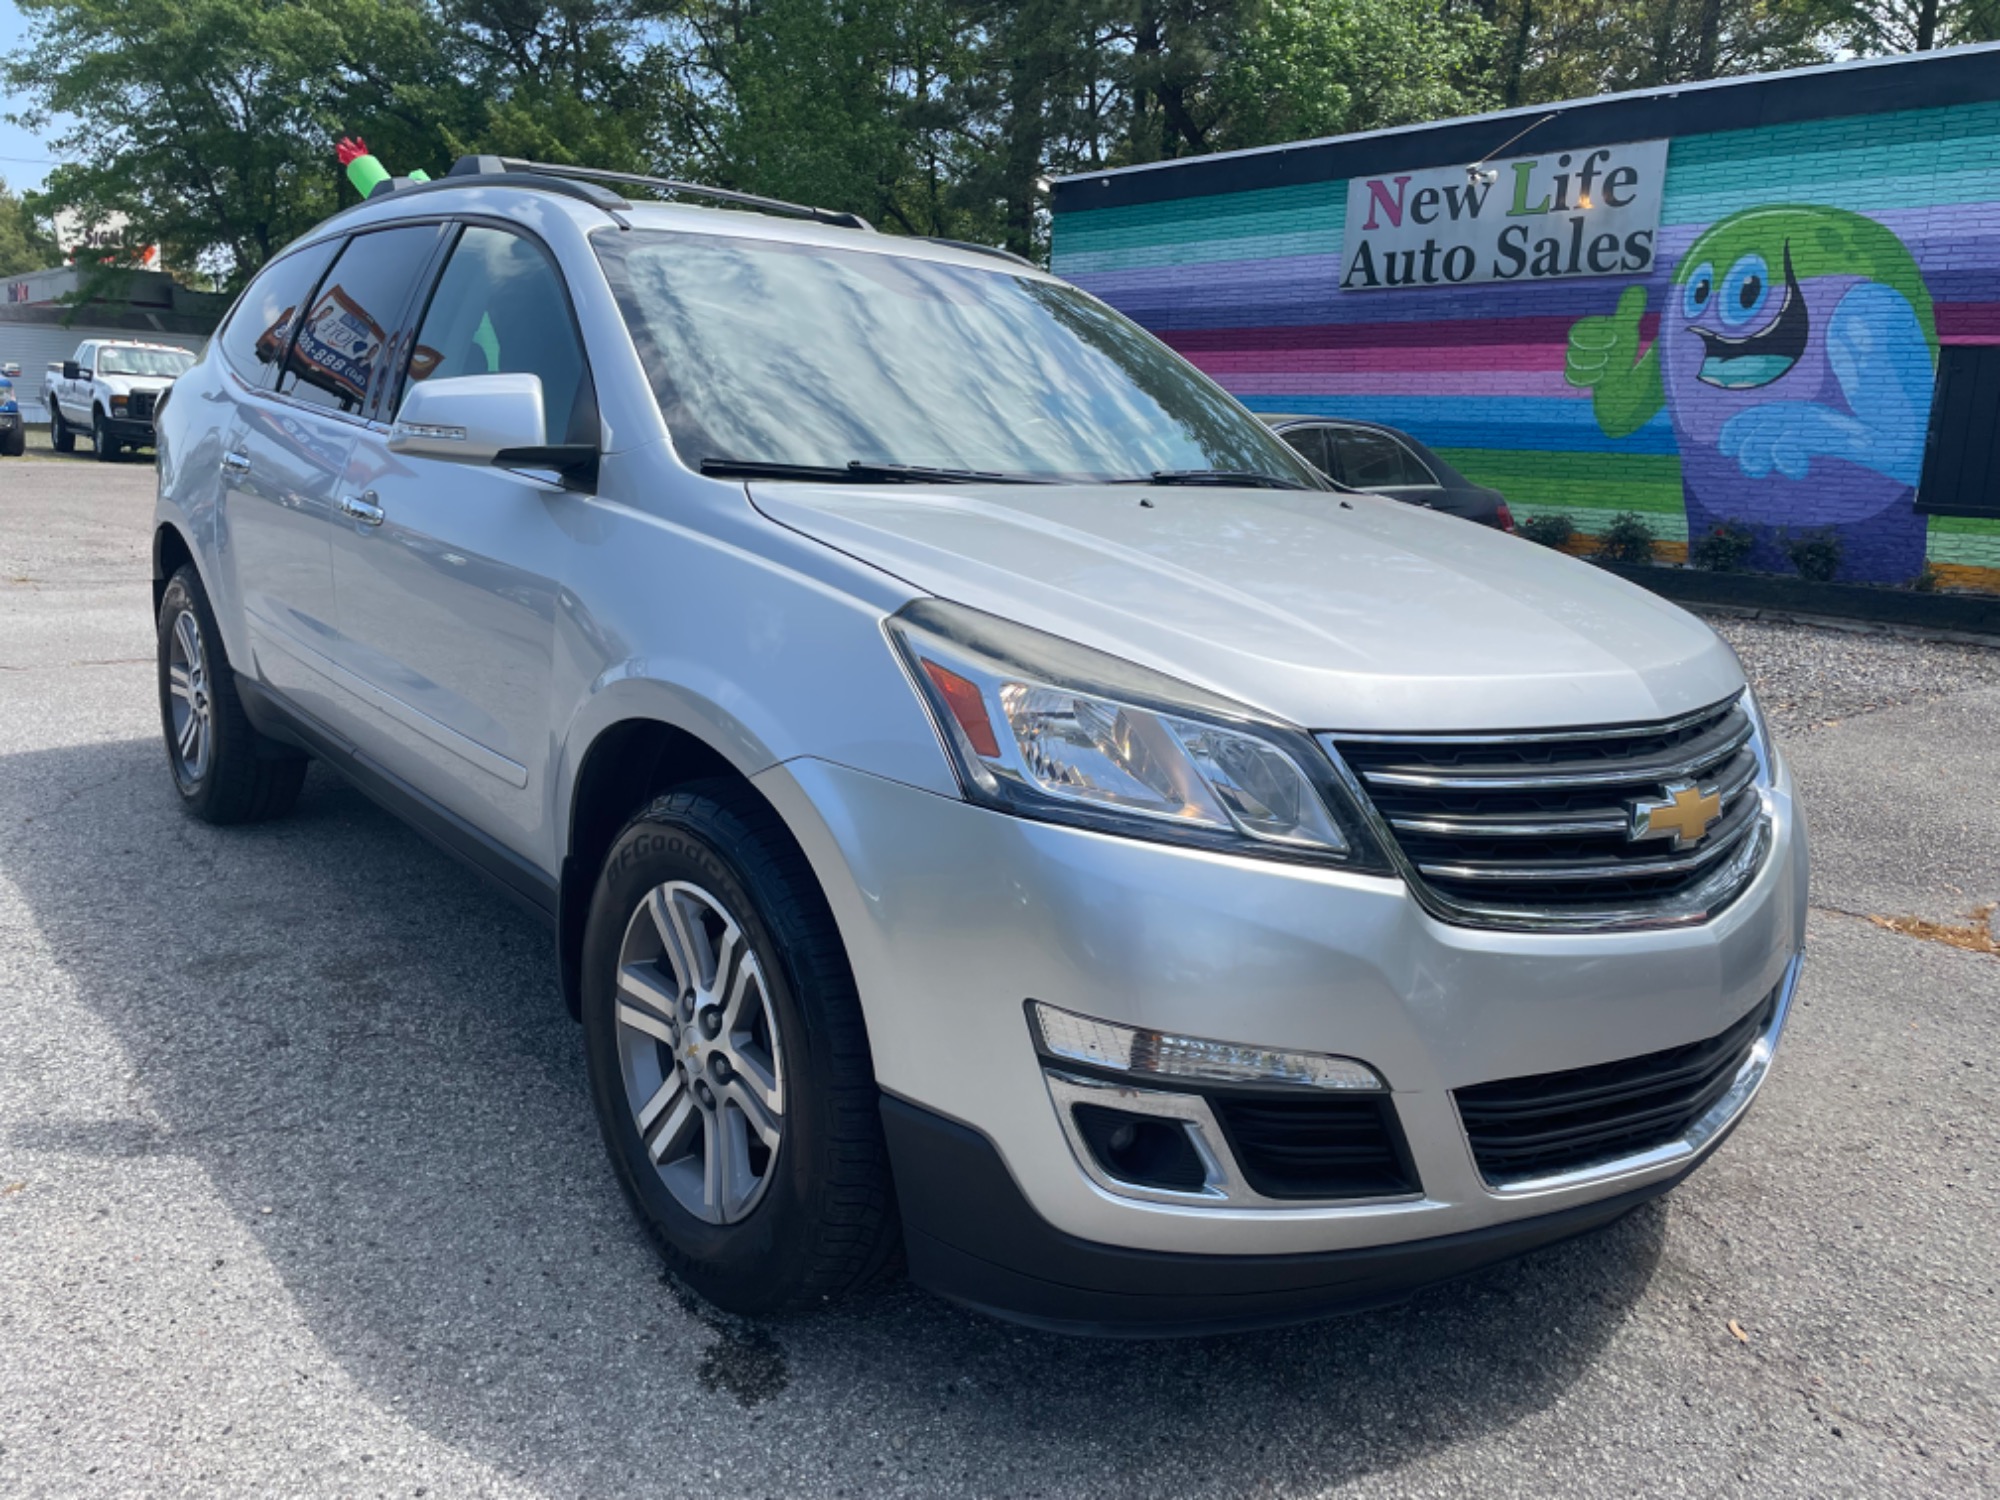 photo of 2017 CHEVROLET TRAVERSE LT2 - Great Third Row! Well Maintained! Local Trade-in!